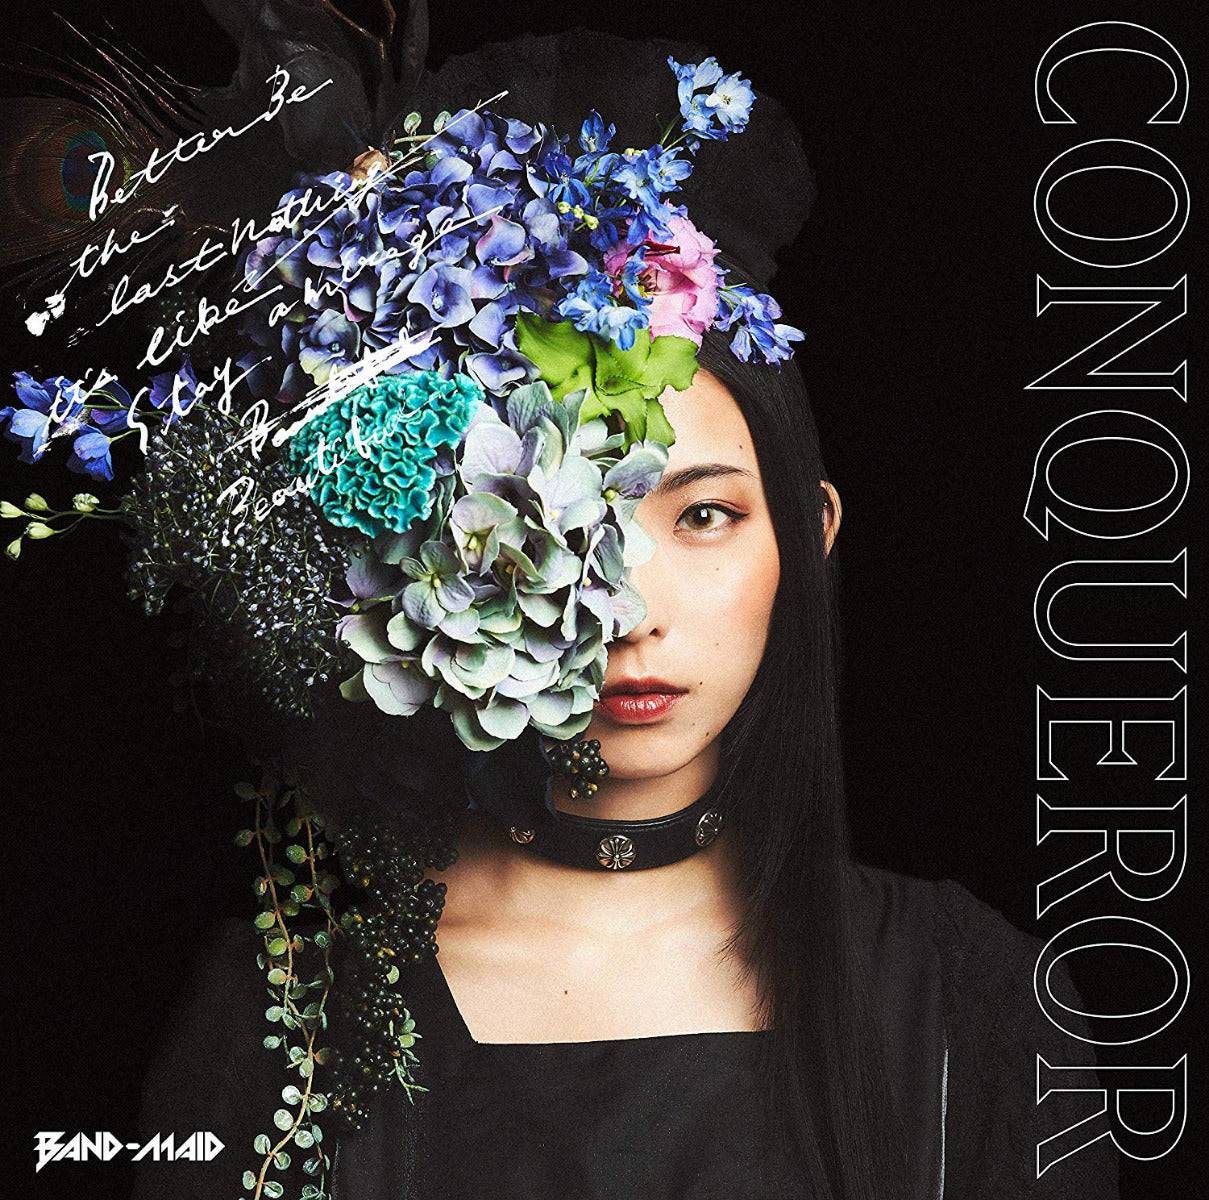 BAND-MAID CONQUEROR (CD + DVD) [First Limited Edition B] - BAND-MAID Shop